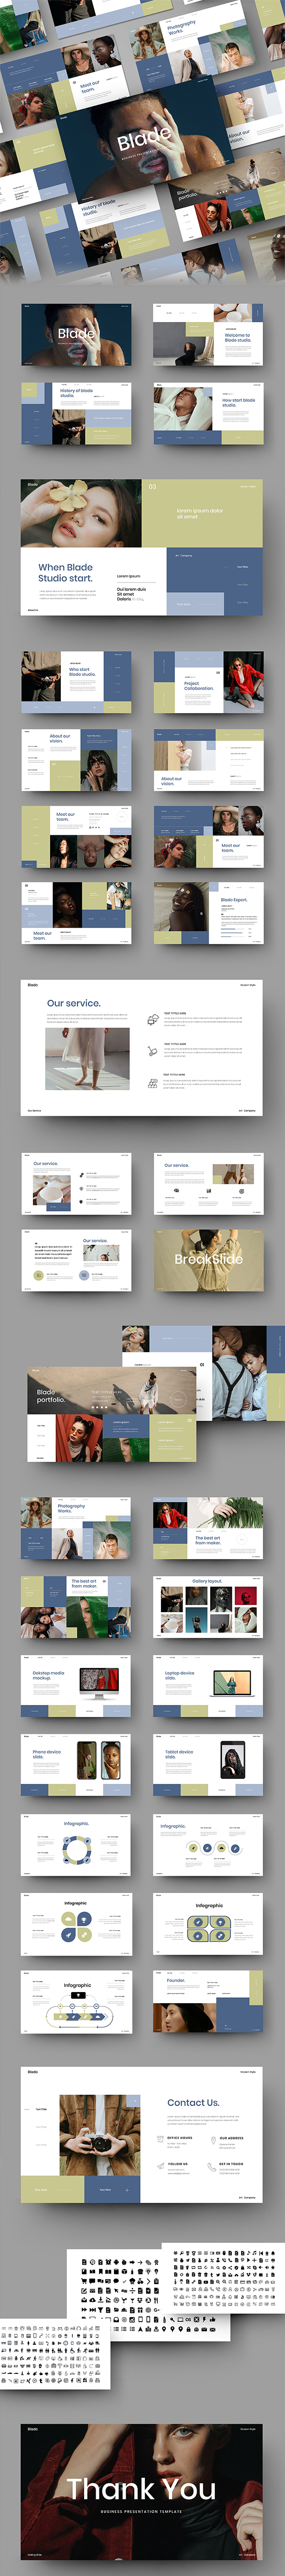 Blade - Business PowerPoint Template